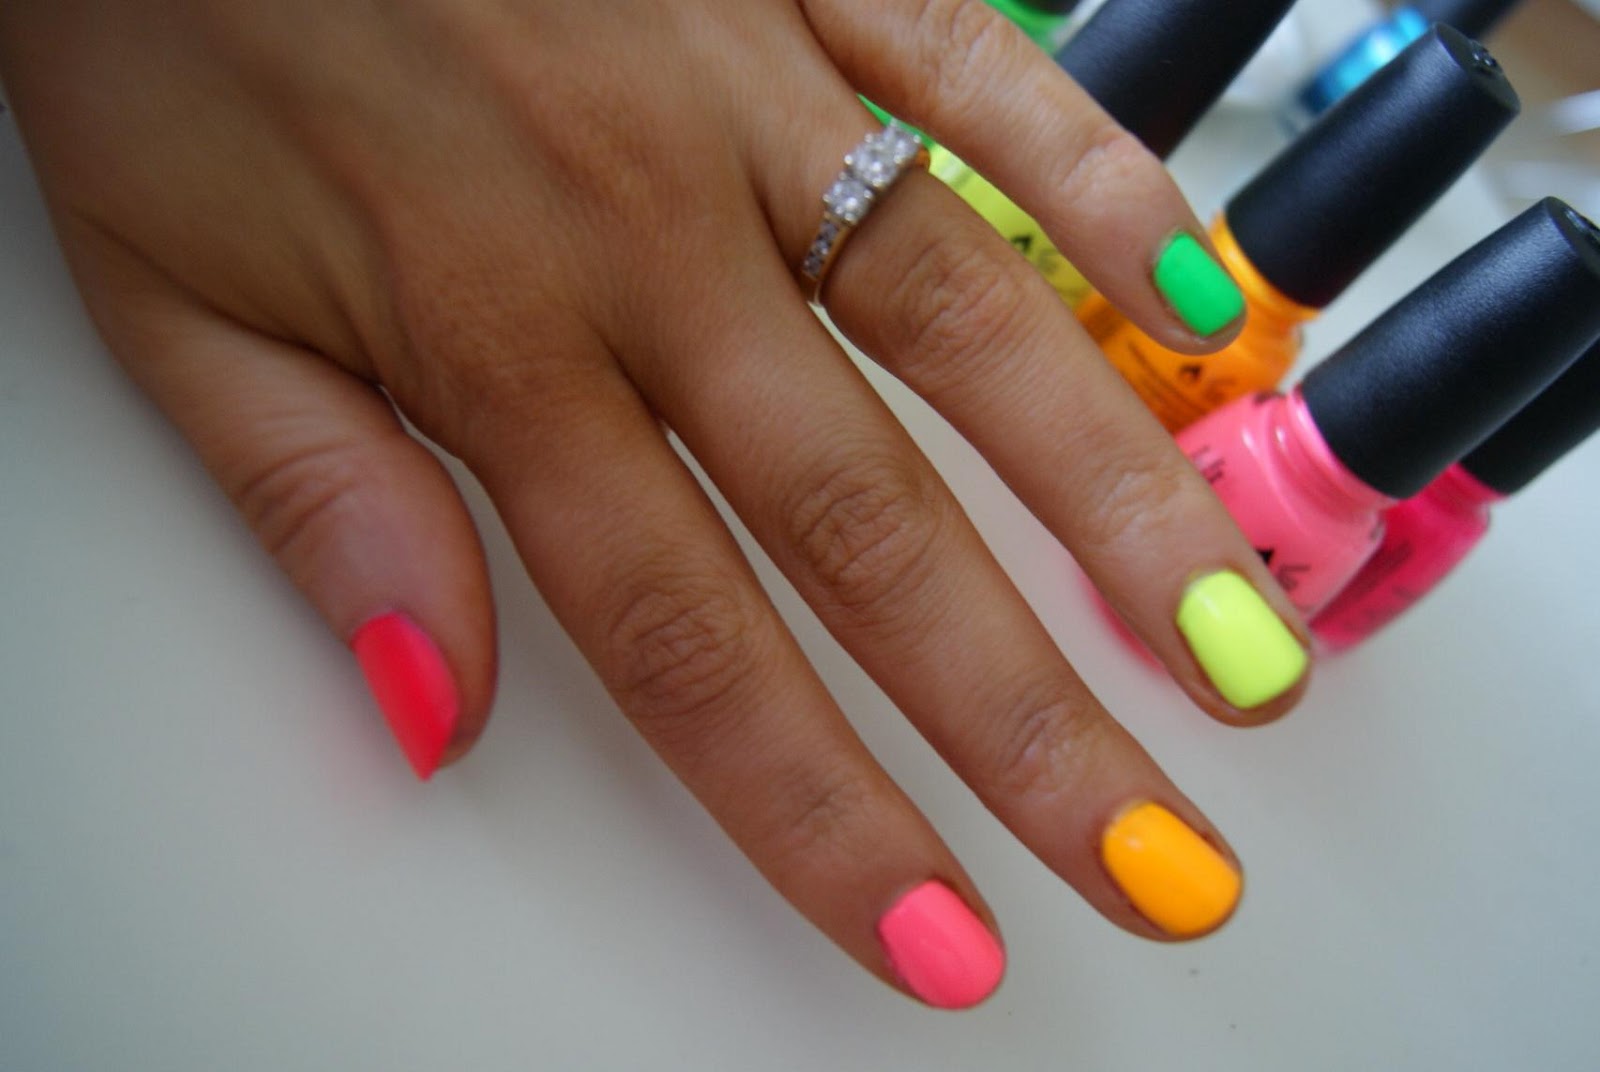 5. "Bold Bright Nail Colors for Long Nails" - wide 3